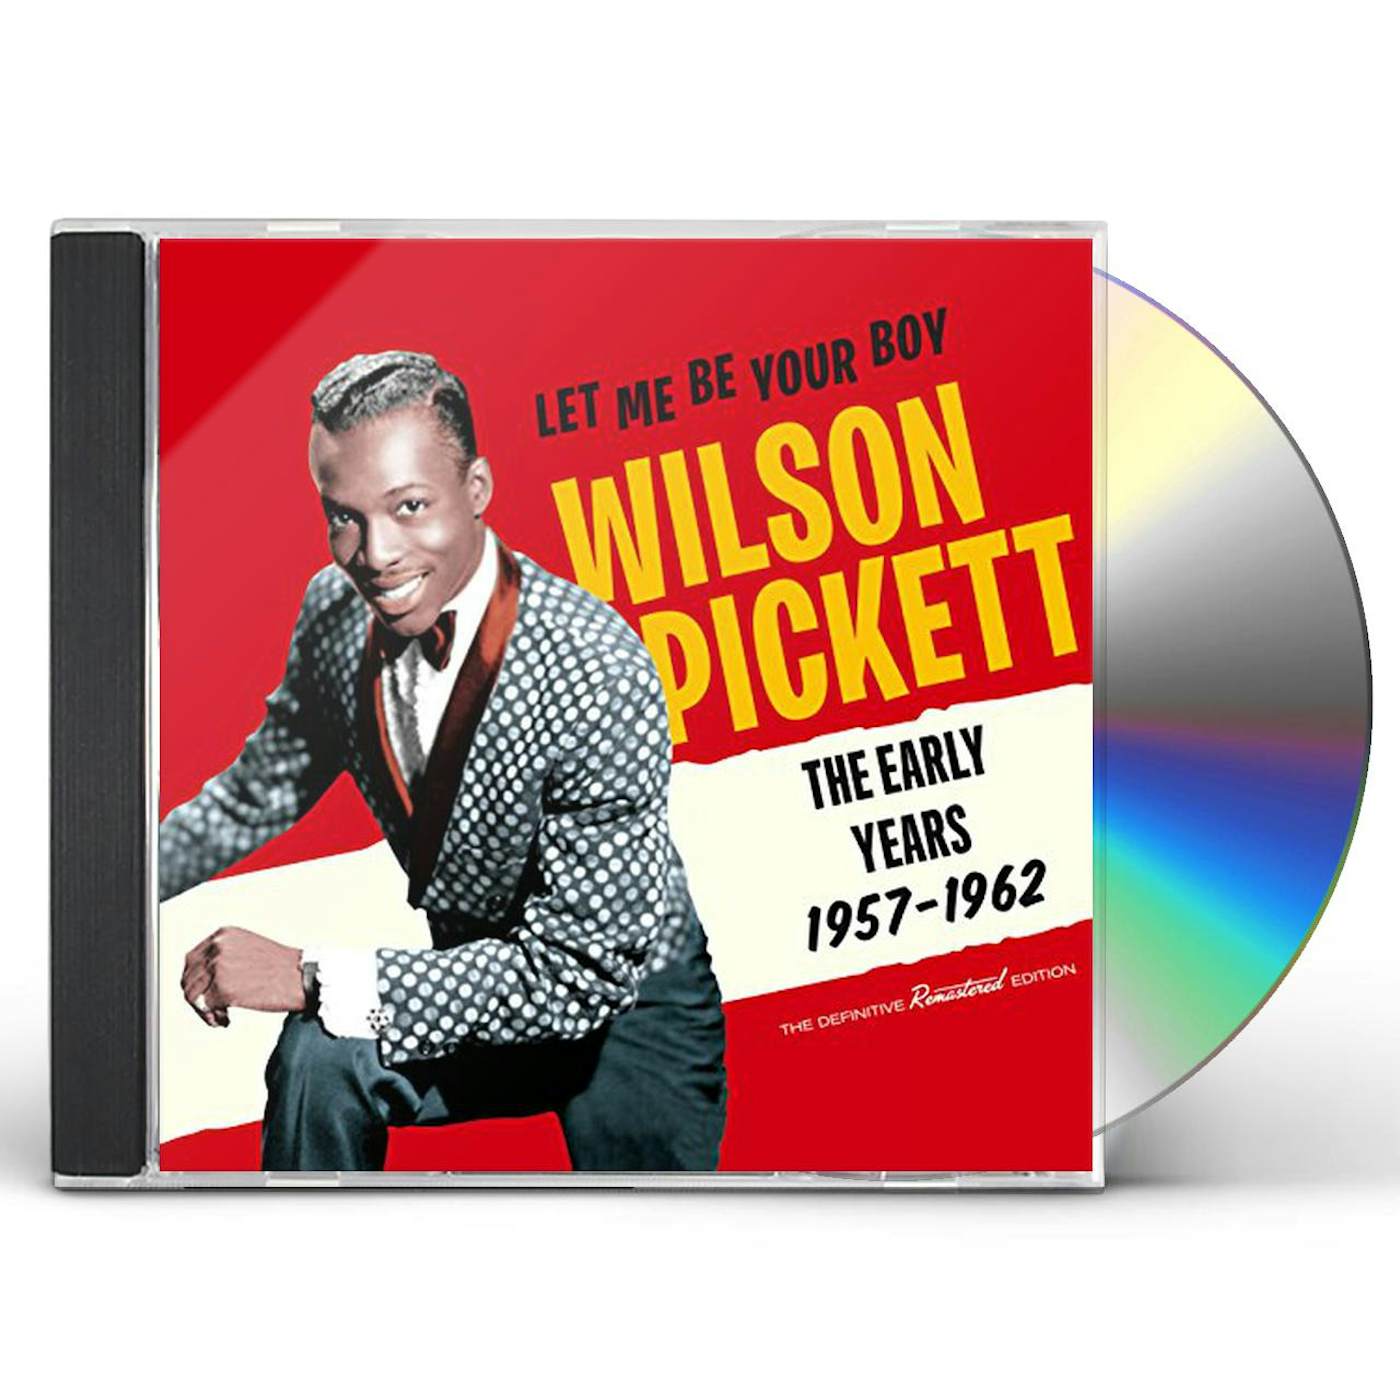 Wilson Pickett LET ME BE YOUR BOY: EARLY YEARS 1957-1962 CD